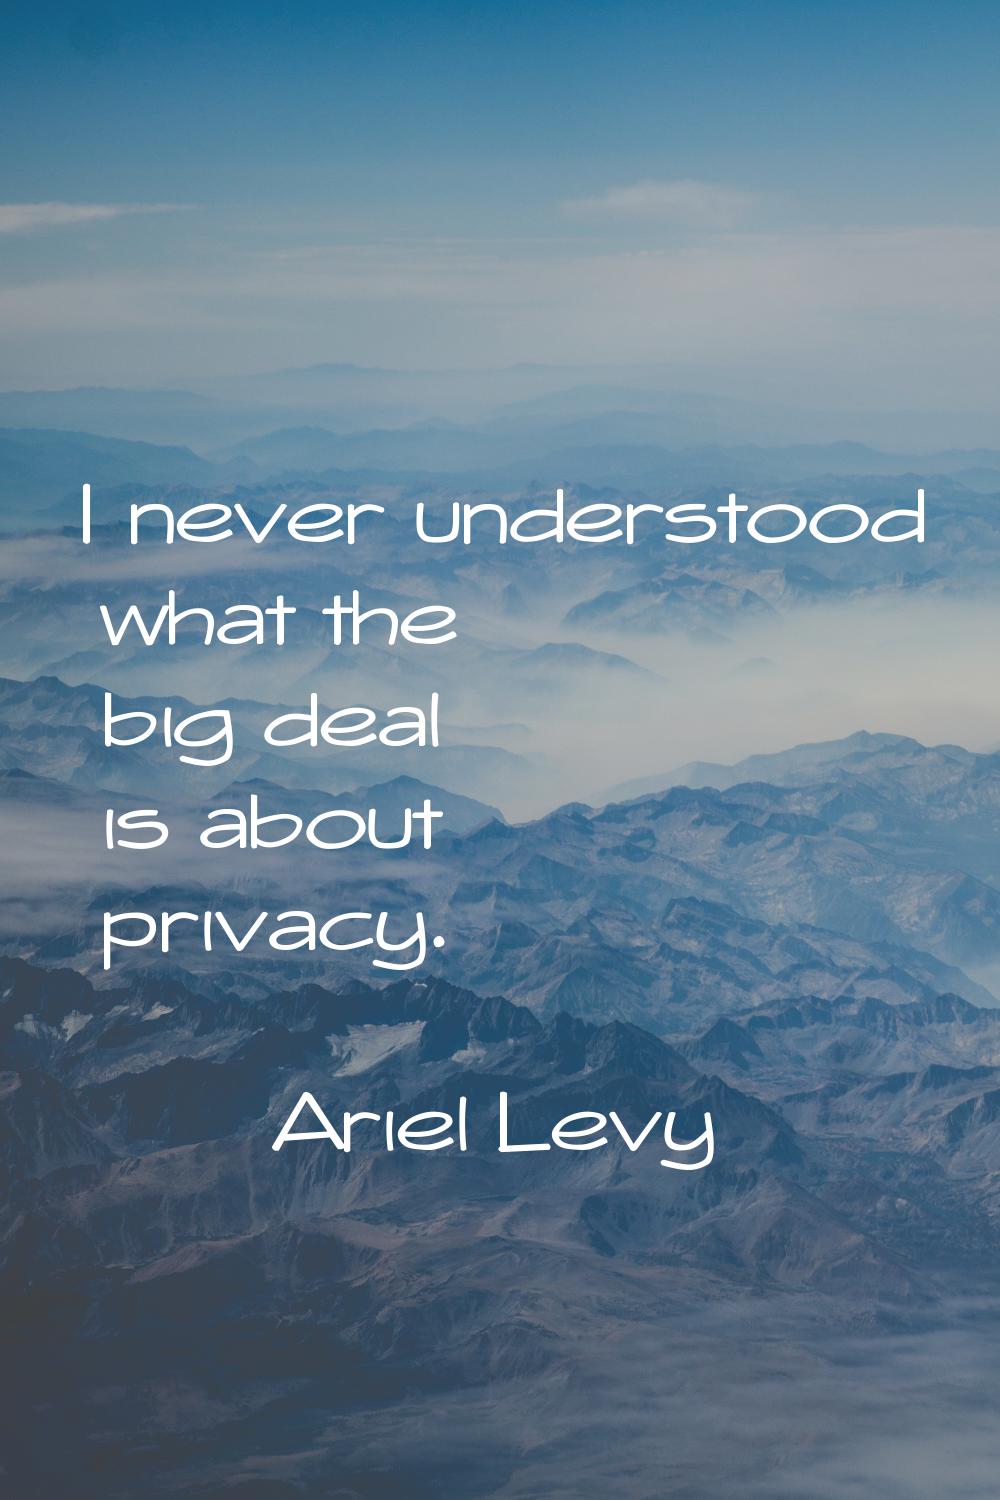 I never understood what the big deal is about privacy.